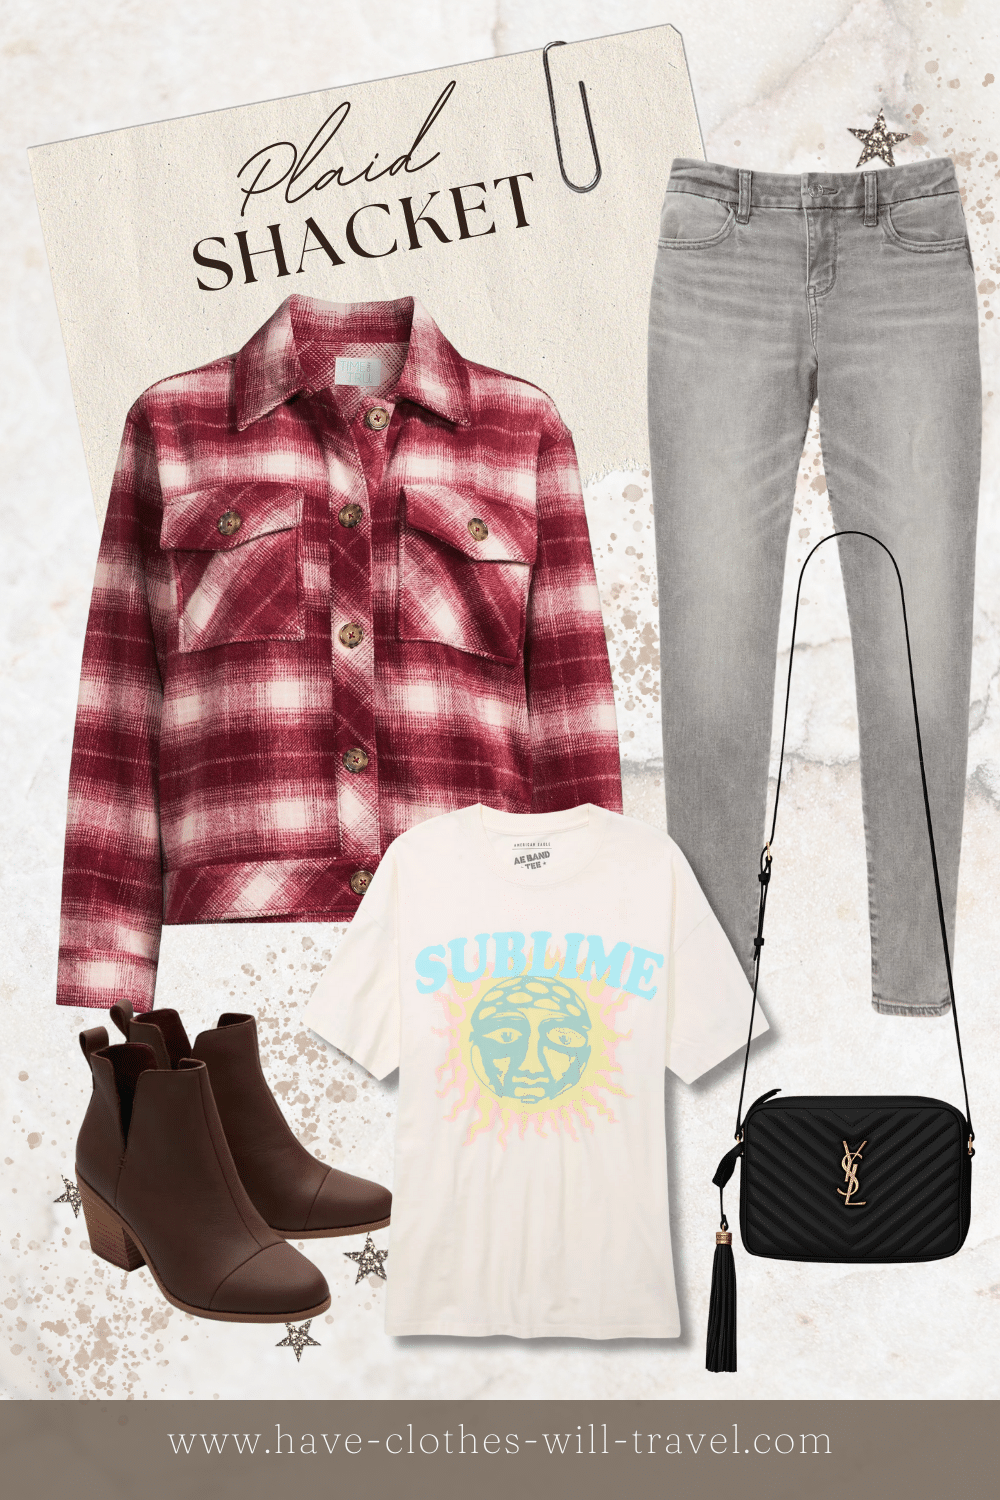 A plaid shacket outfit featuring grey jeans and a white tee plus a black YSL crossbody bag